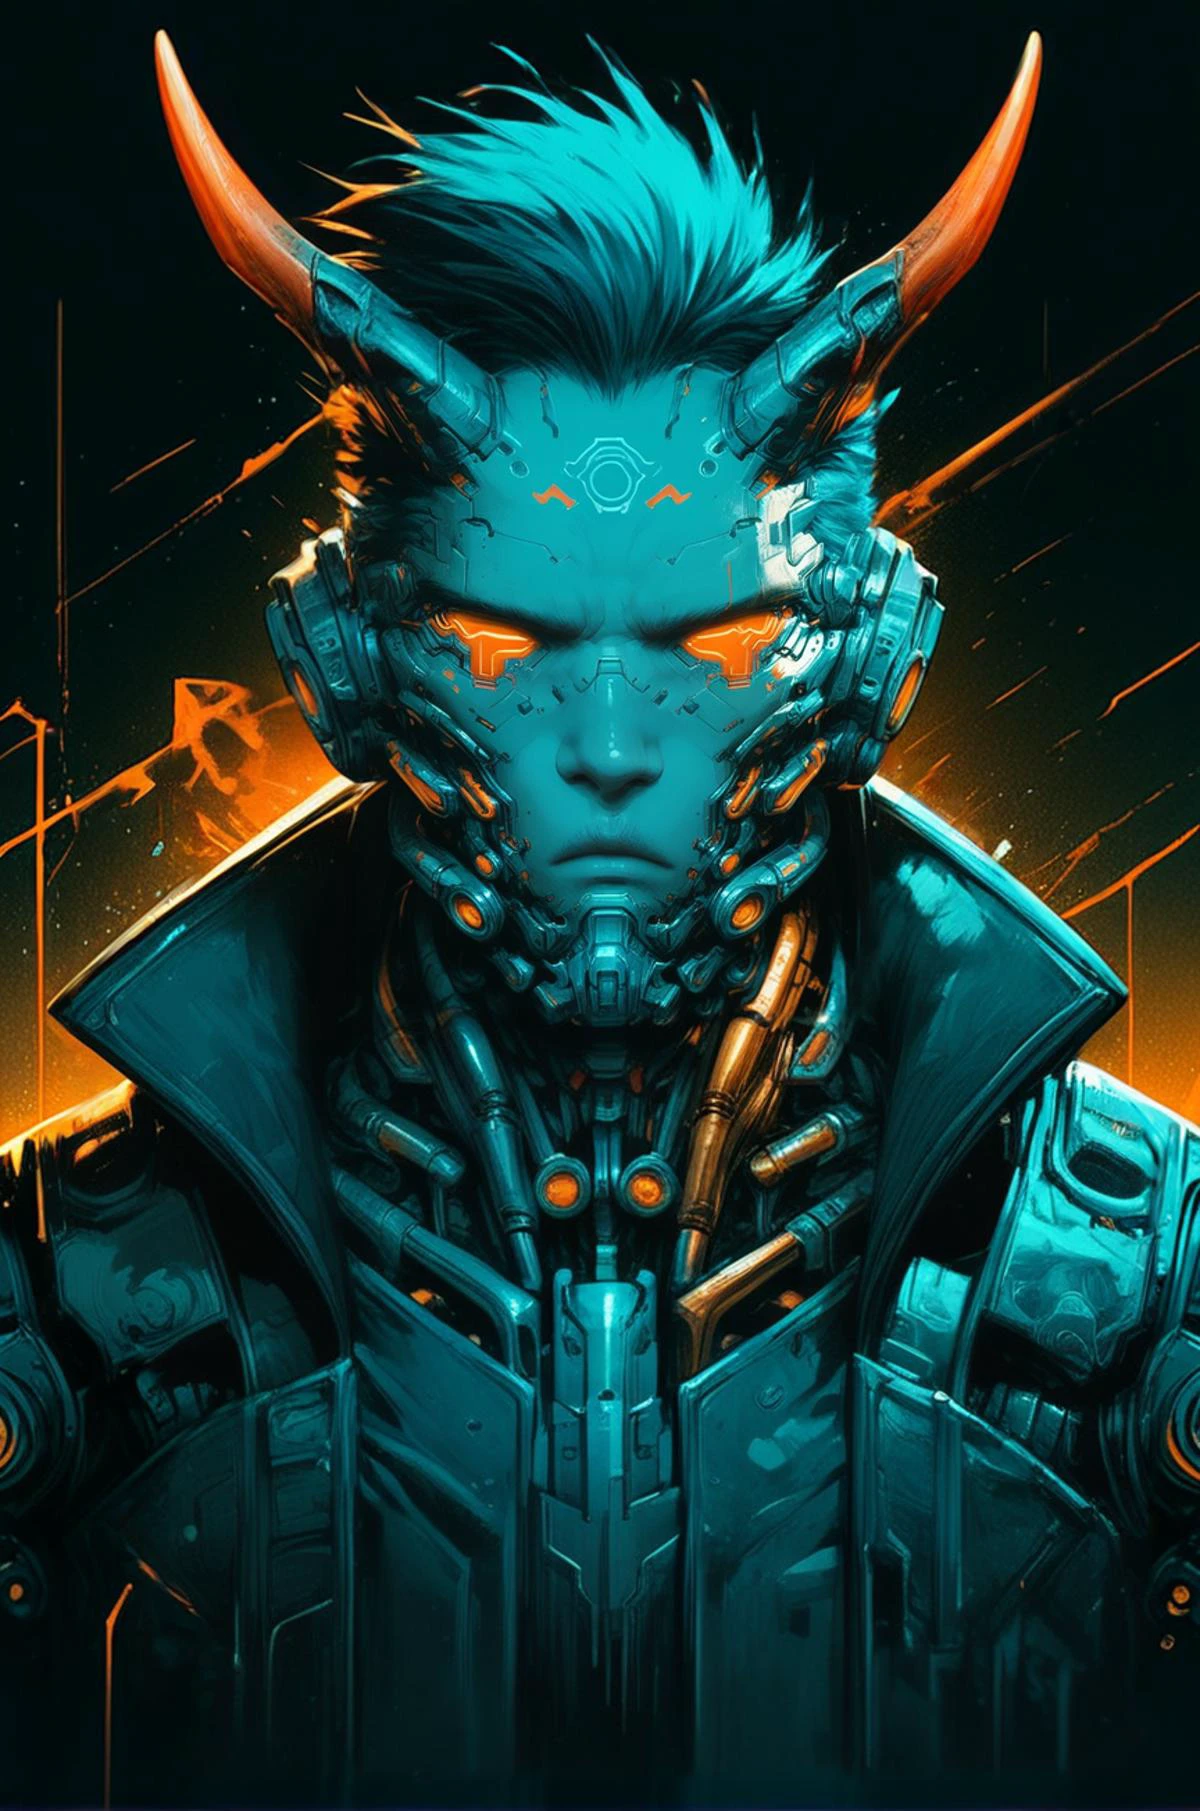 biomechanical style one male man,serious face, bob, horns, broad shoulders, cyberpunk, looking at viewer, heavy tones, detail, dark background, dramatic, front view score_9, score_8_up, score_7_up . blend of organic and mechanical elements, futuristic, cybernetic, detailed, intricate